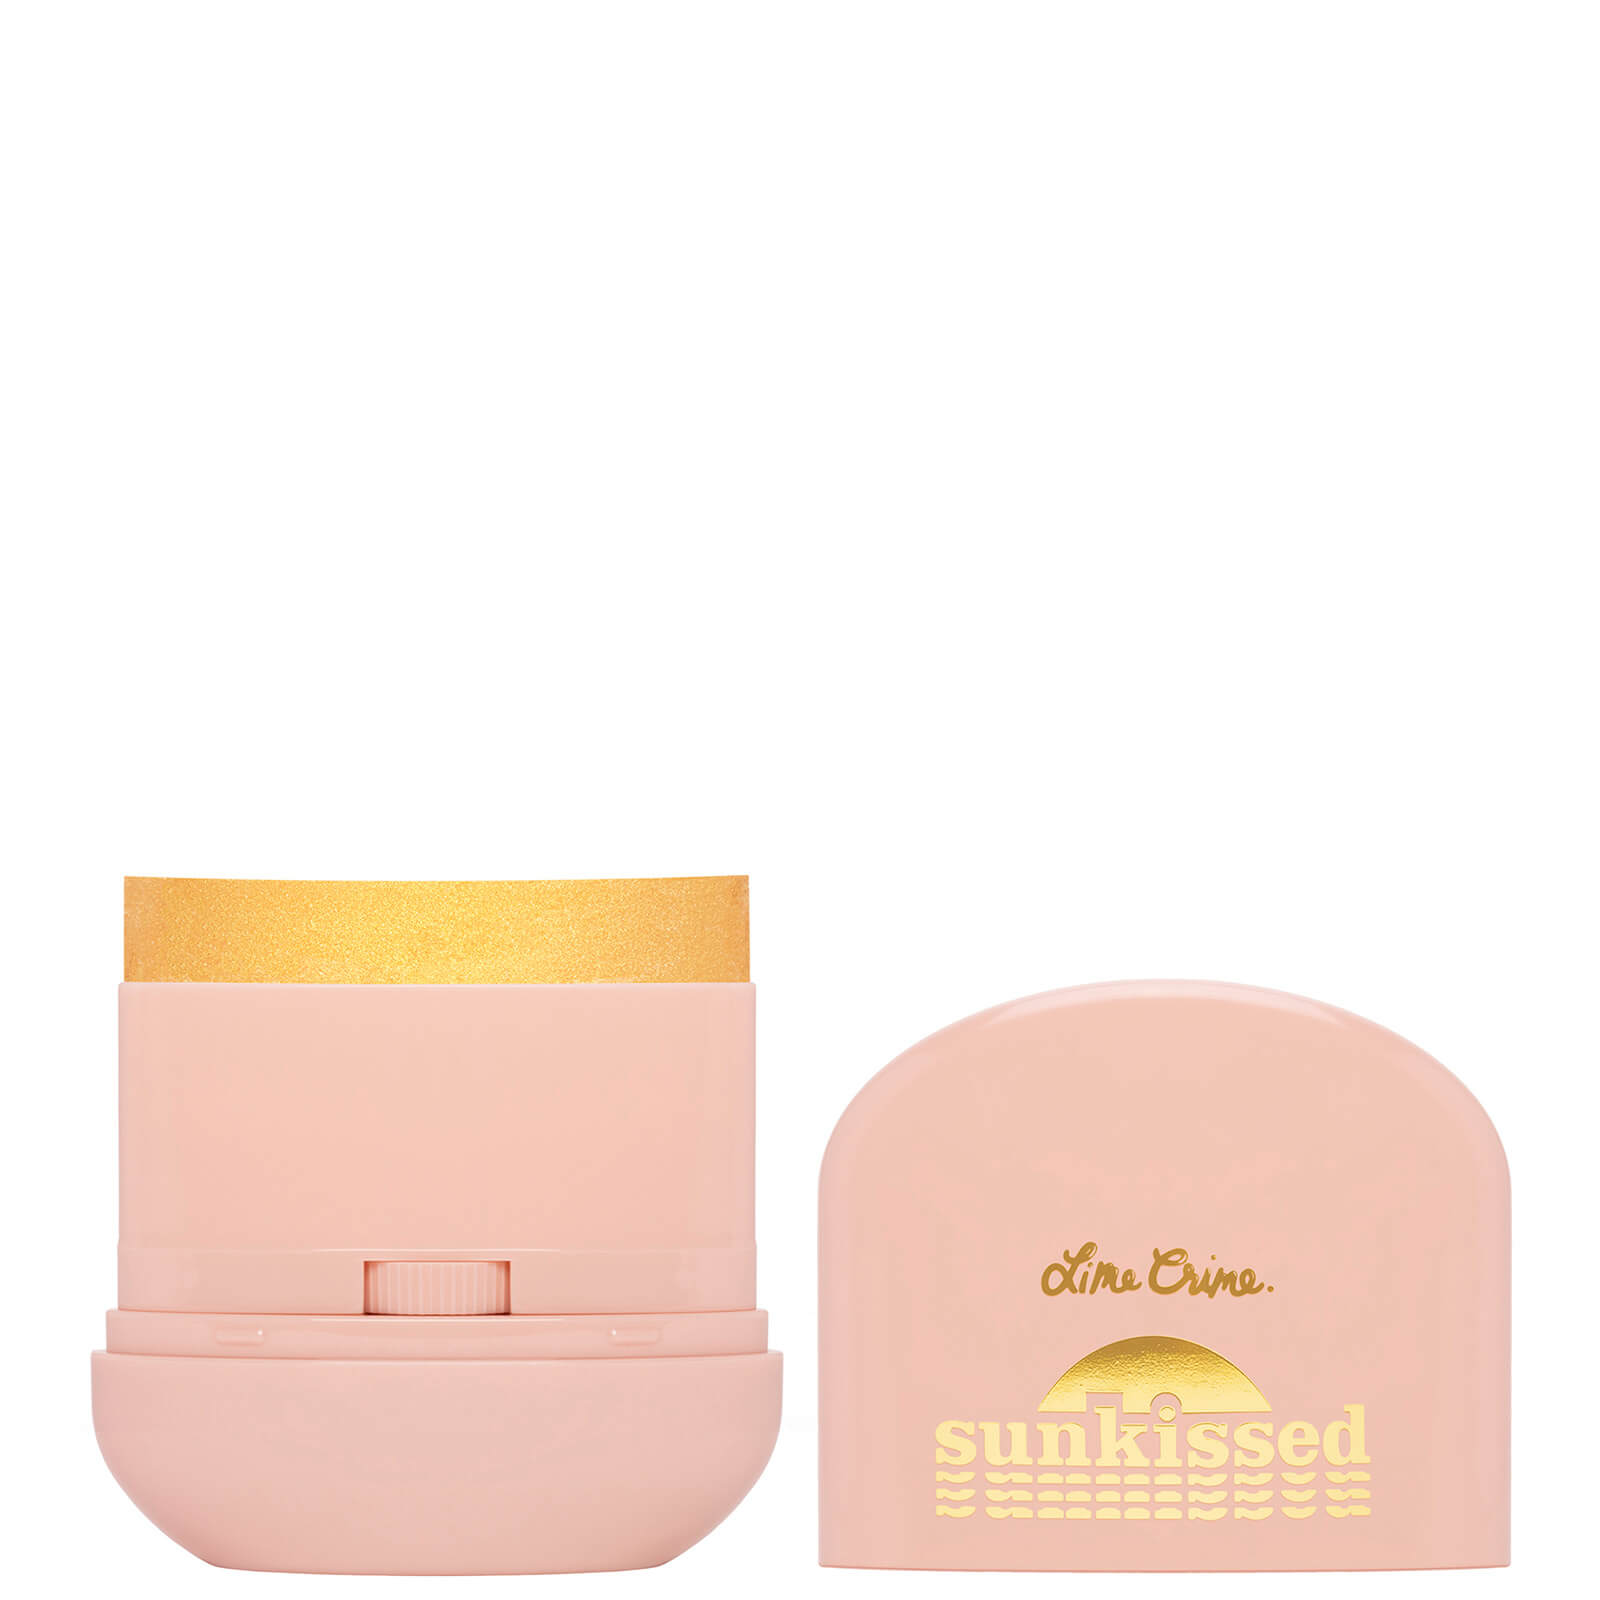 Lime Crime Sunkissed Skin Glimmering Stick 11g (Various Shades) - Gold Coast